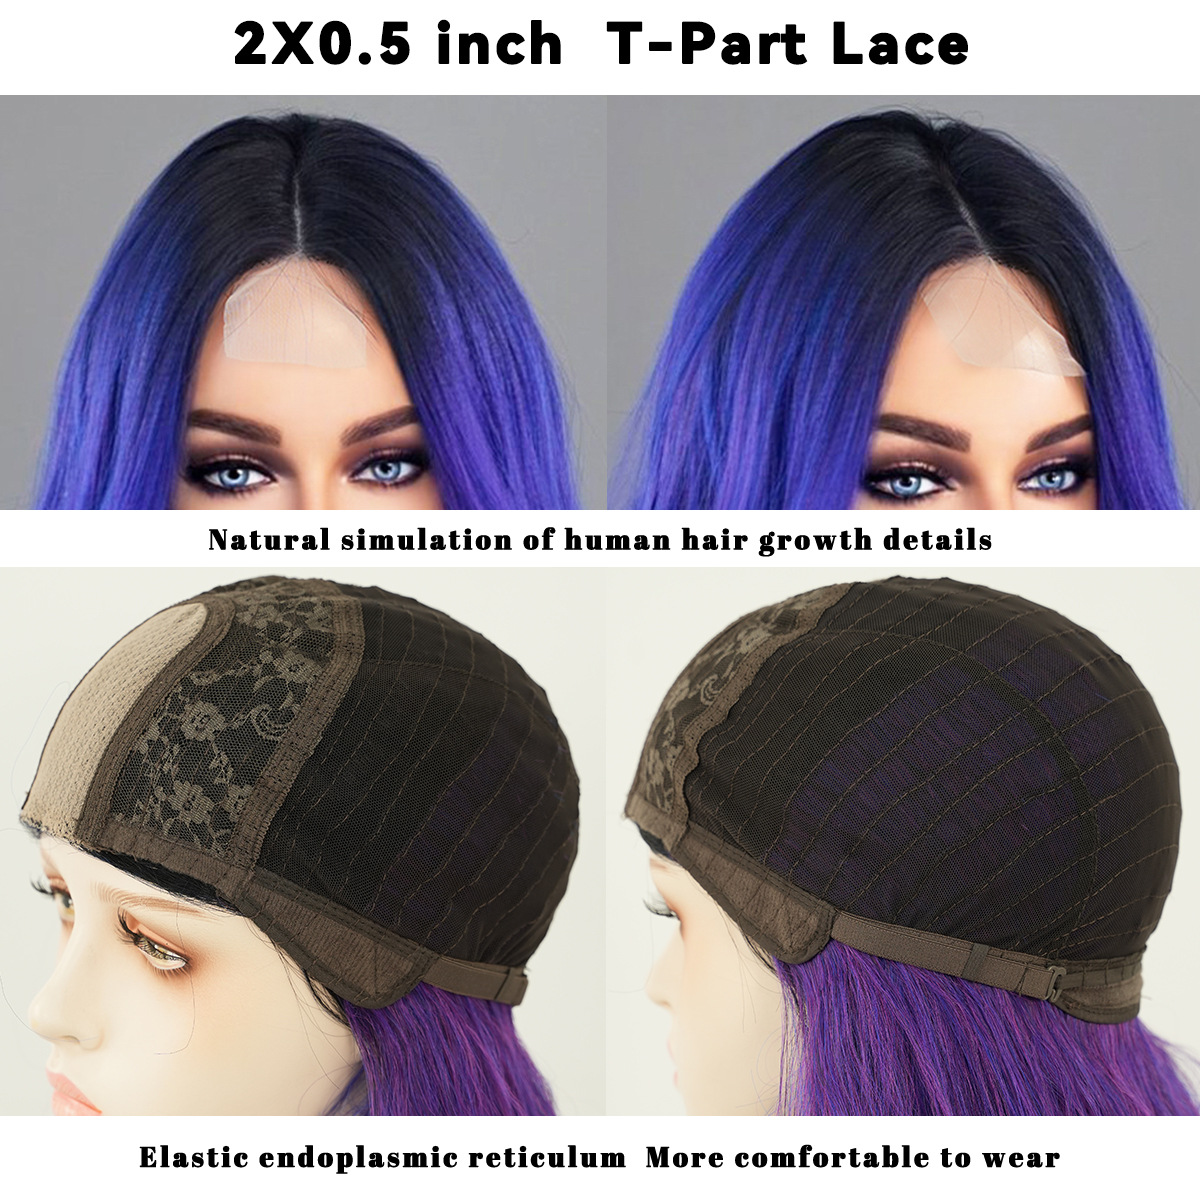 A fashionable synthetic wig with dreamy purple blue gradient and middle-parted waves hair, featuring small lace